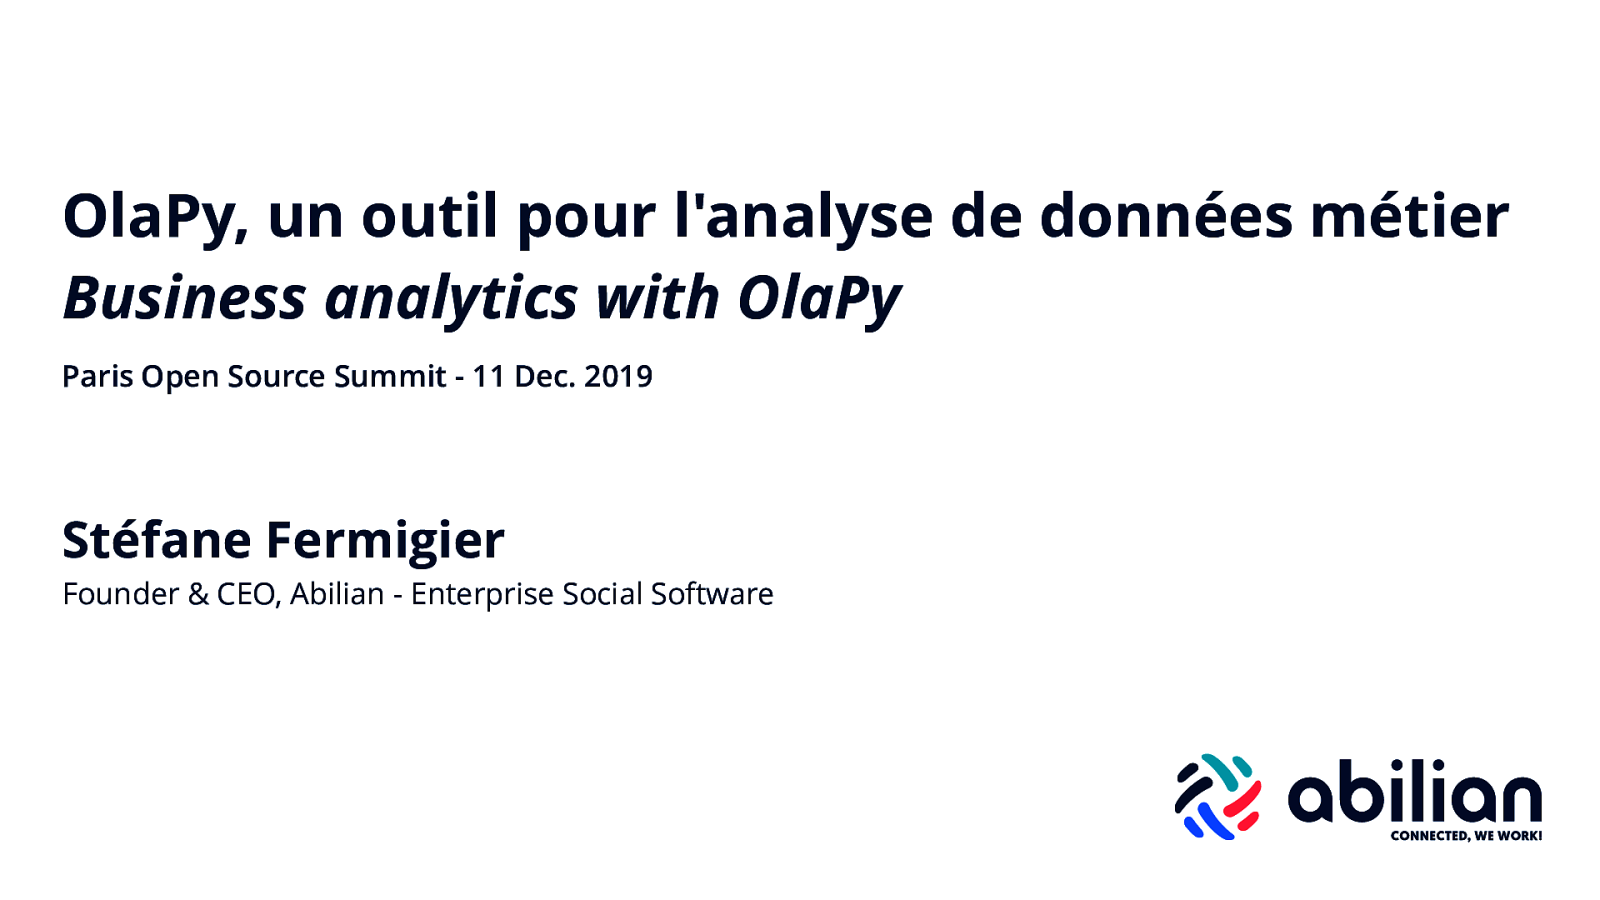 Business analytics with OlaPy